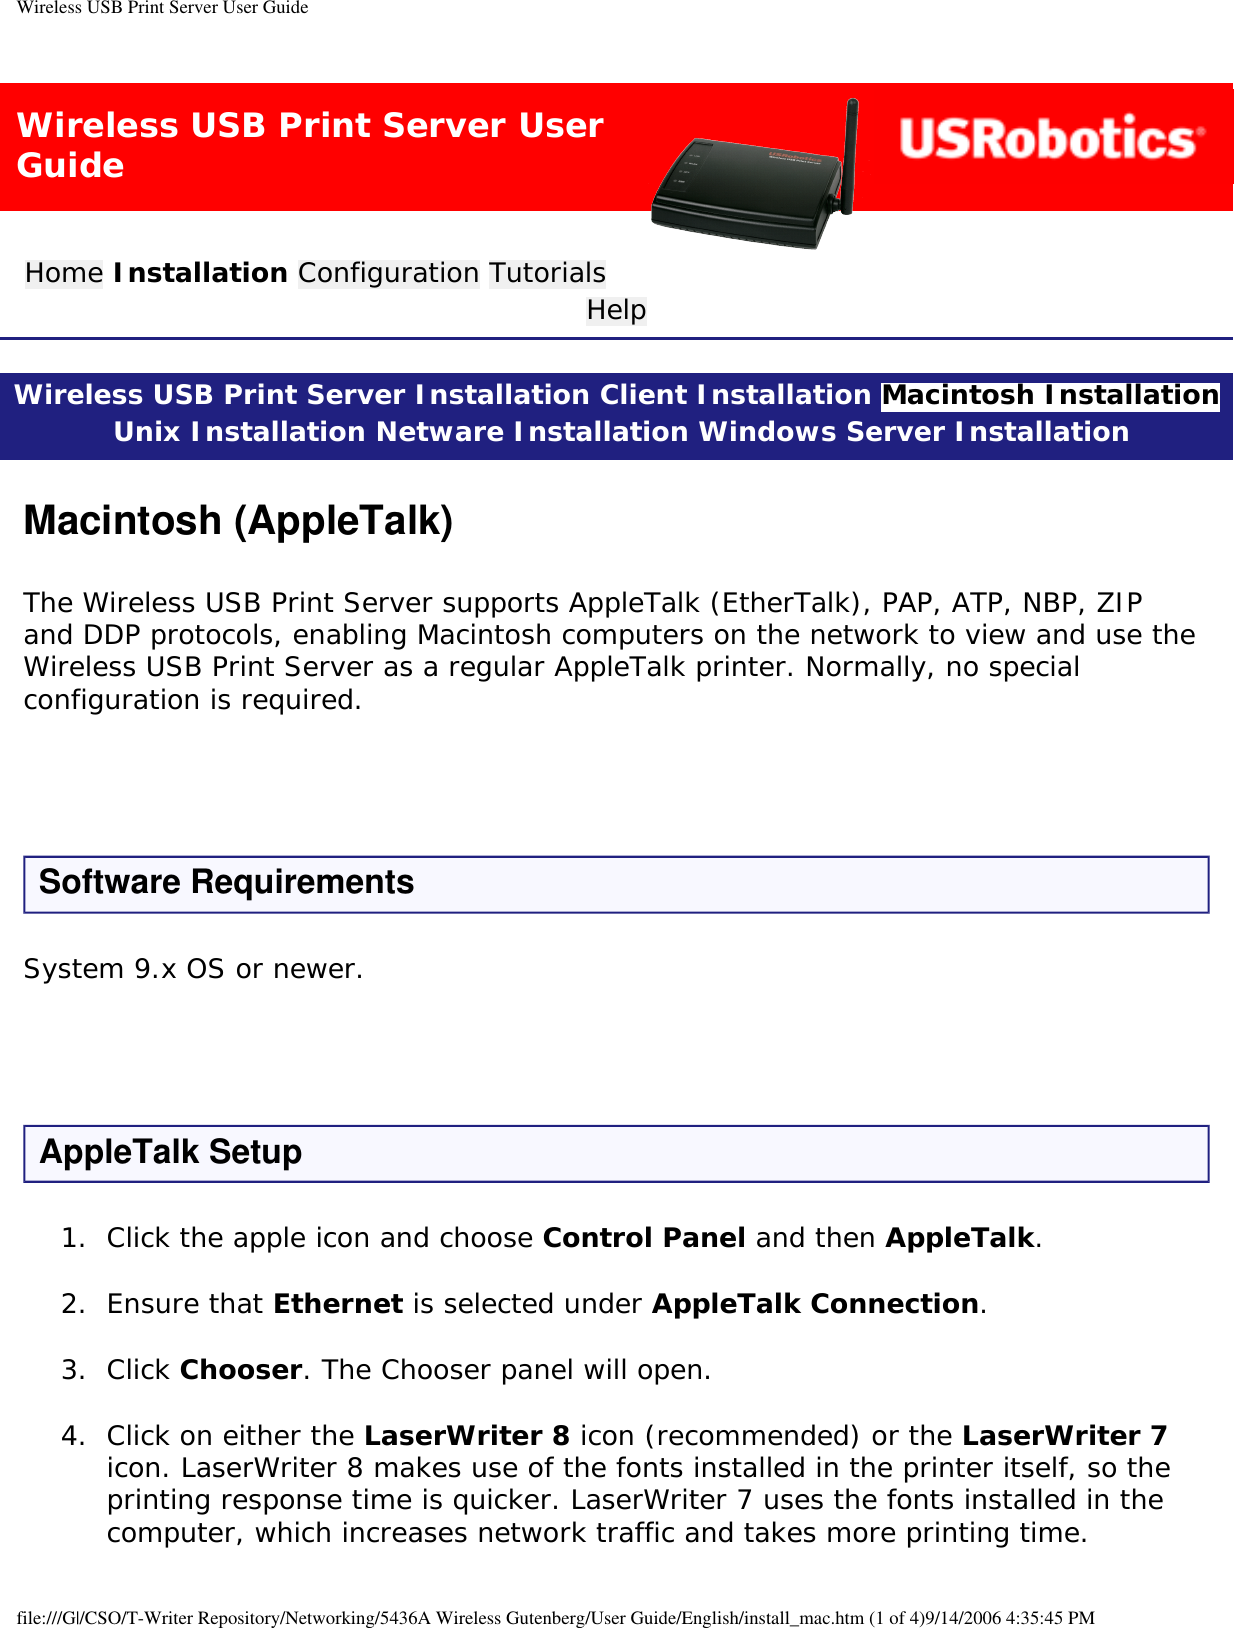 Wireless USB Print Server User GuideWireless USB Print Server User GuideHome Installation Configuration Tutorials Help Wireless USB Print Server Installation Client Installation Macintosh Installation Unix Installation Netware Installation Windows Server Installation Macintosh (AppleTalk)The Wireless USB Print Server supports AppleTalk (EtherTalk), PAP, ATP, NBP, ZIP and DDP protocols, enabling Macintosh computers on the network to view and use the Wireless USB Print Server as a regular AppleTalk printer. Normally, no special configuration is required.  Software RequirementsSystem 9.x OS or newer. AppleTalk Setup1.  Click the apple icon and choose Control Panel and then AppleTalk. 2.  Ensure that Ethernet is selected under AppleTalk Connection. 3.  Click Chooser. The Chooser panel will open. 4.  Click on either the LaserWriter 8 icon (recommended) or the LaserWriter 7 icon. LaserWriter 8 makes use of the fonts installed in the printer itself, so the printing response time is quicker. LaserWriter 7 uses the fonts installed in the computer, which increases network traffic and takes more printing time. file:///G|/CSO/T-Writer Repository/Networking/5436A Wireless Gutenberg/User Guide/English/install_mac.htm (1 of 4)9/14/2006 4:35:45 PM